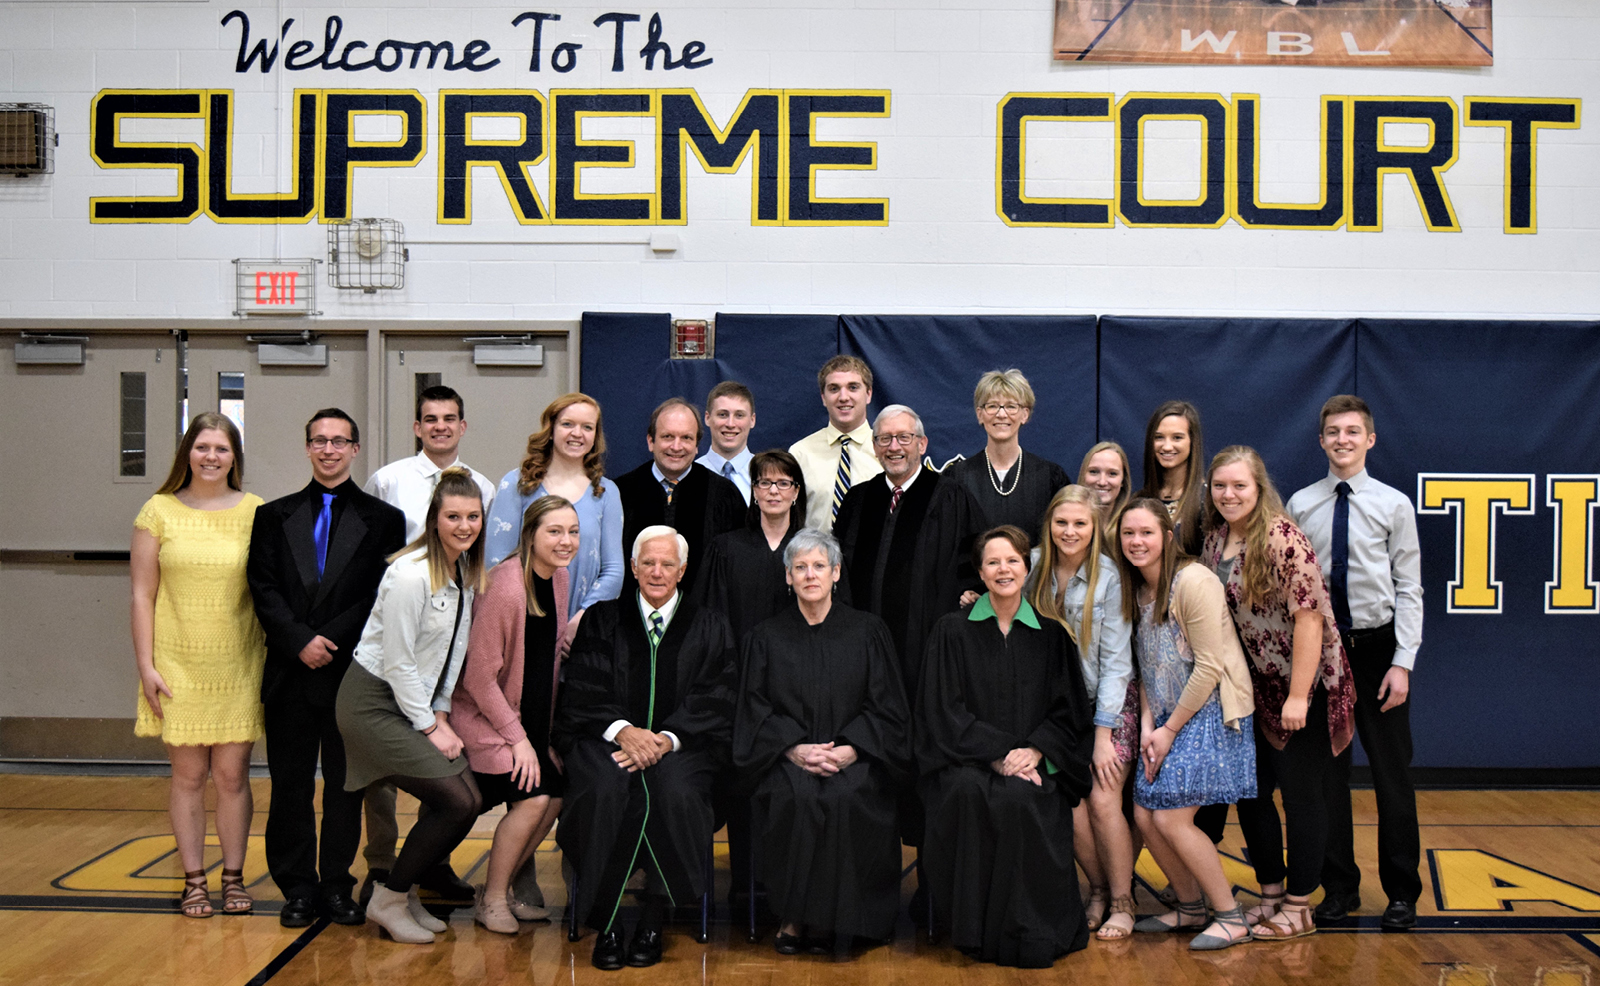 Image of seven justices wearing their black judicial robes posing with a group of high school students in a gymnasium